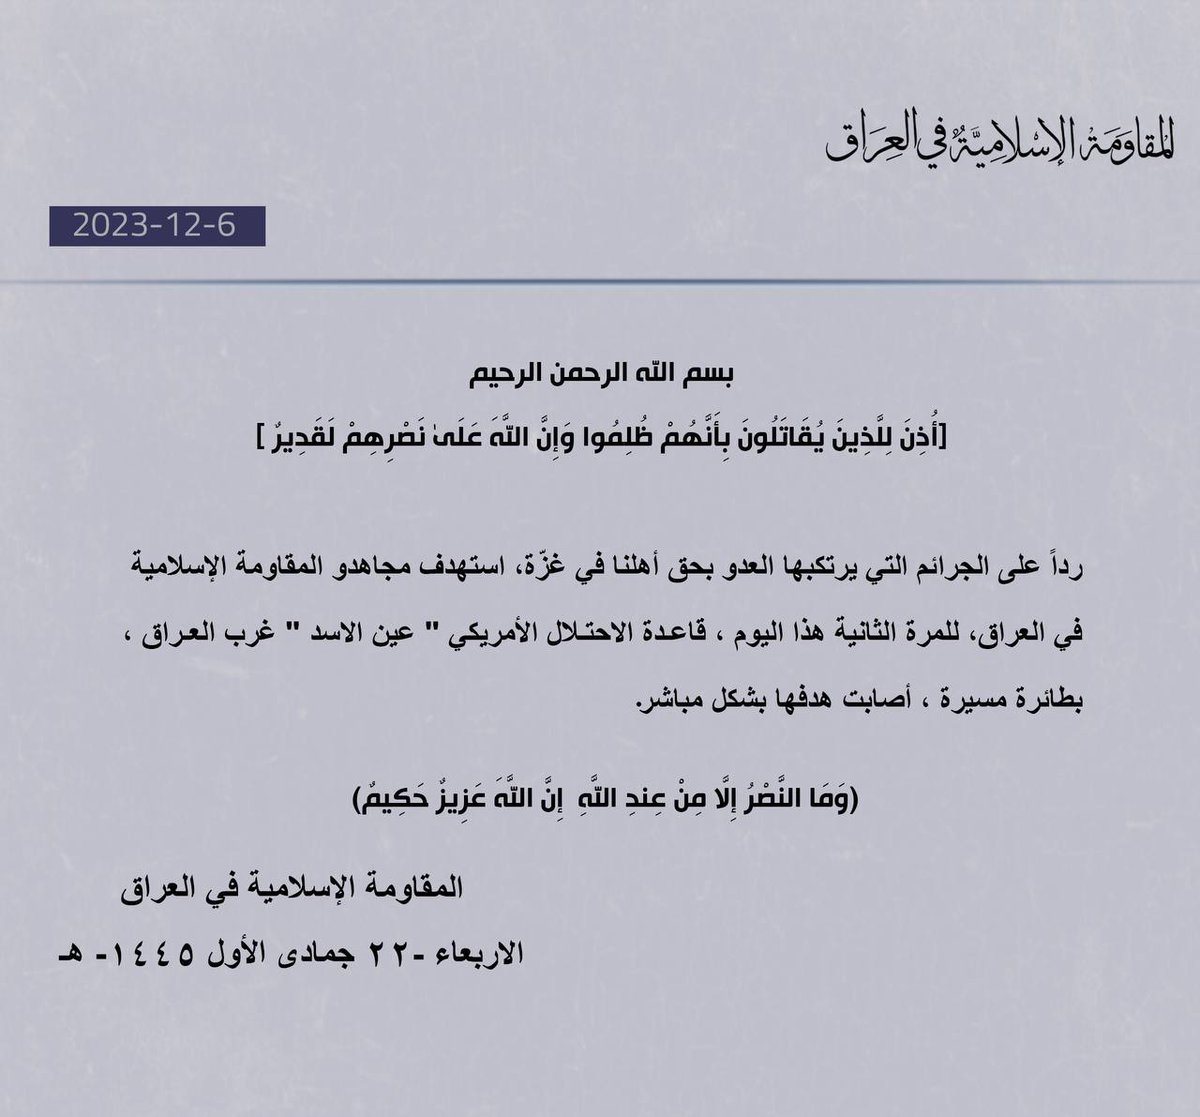 The Islamic Resistance in Iraq claims responsibility for the 2nd attack on Ain Alasad Airbase in Anbar